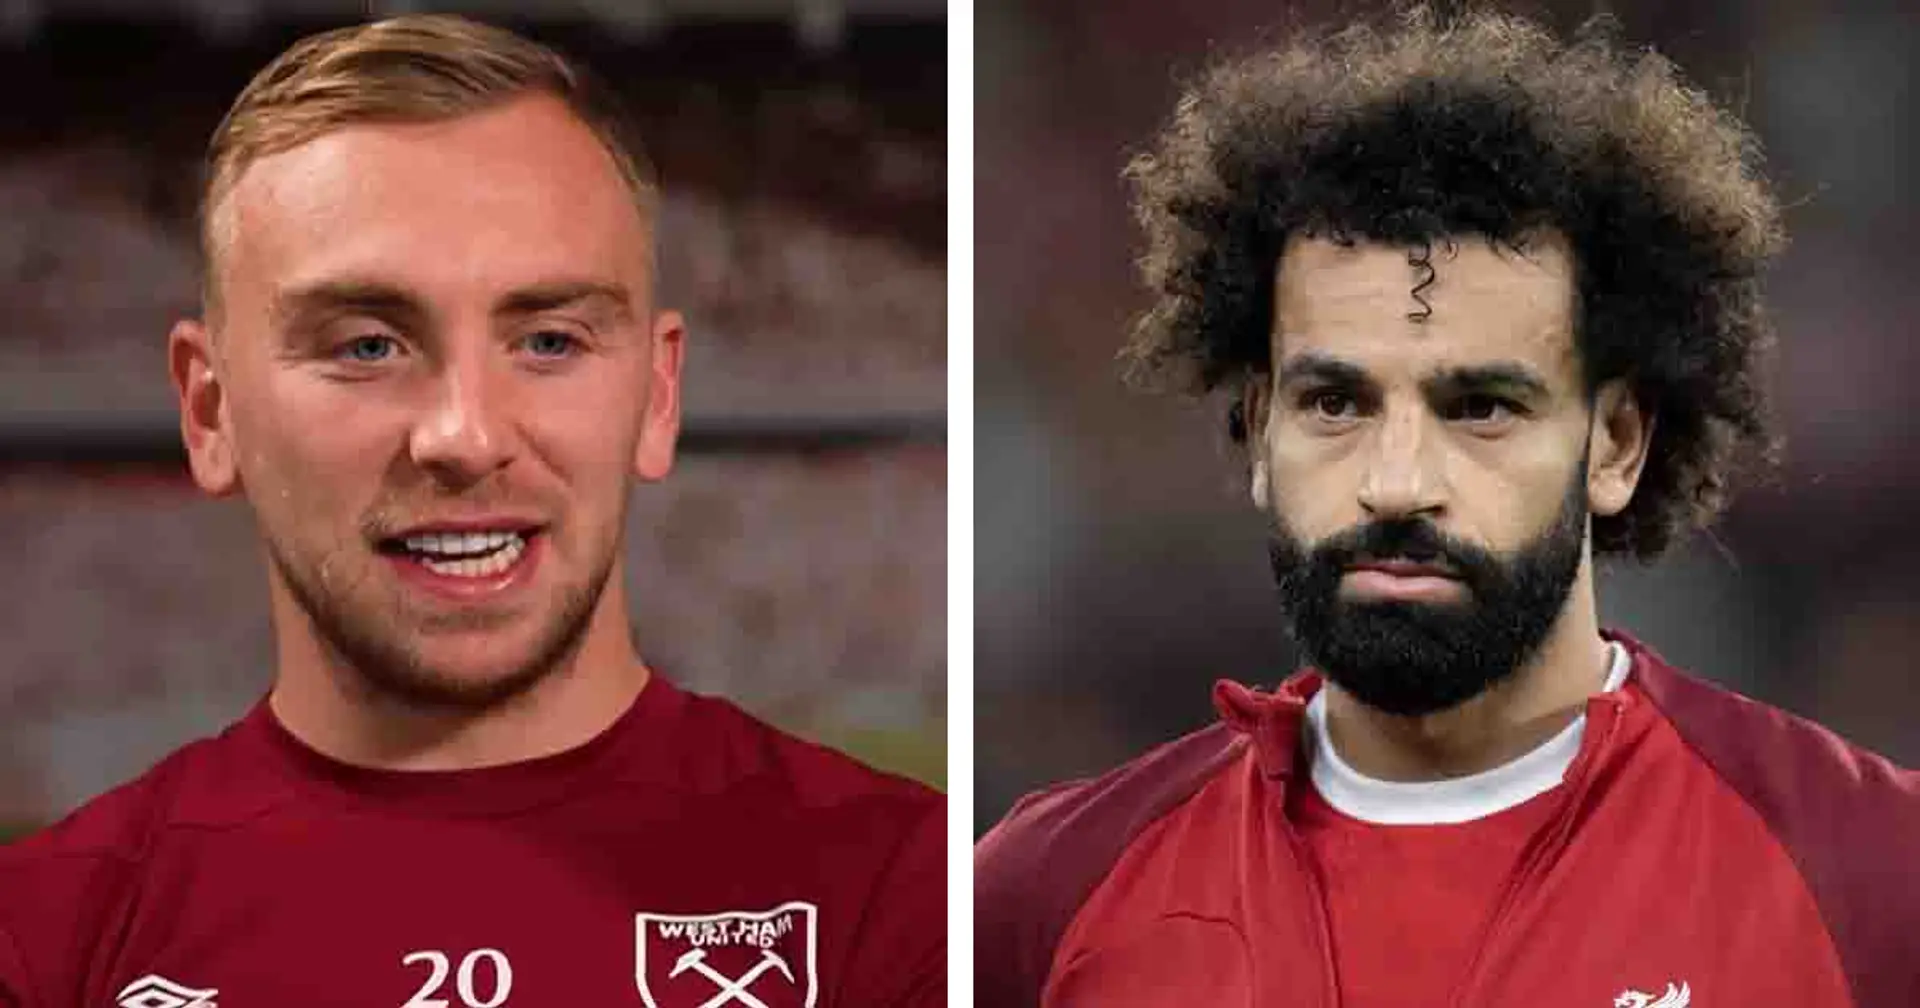 'This is going to be controversial': Jarrod Bowen explains reason behind naming Salah as best winger in PL history